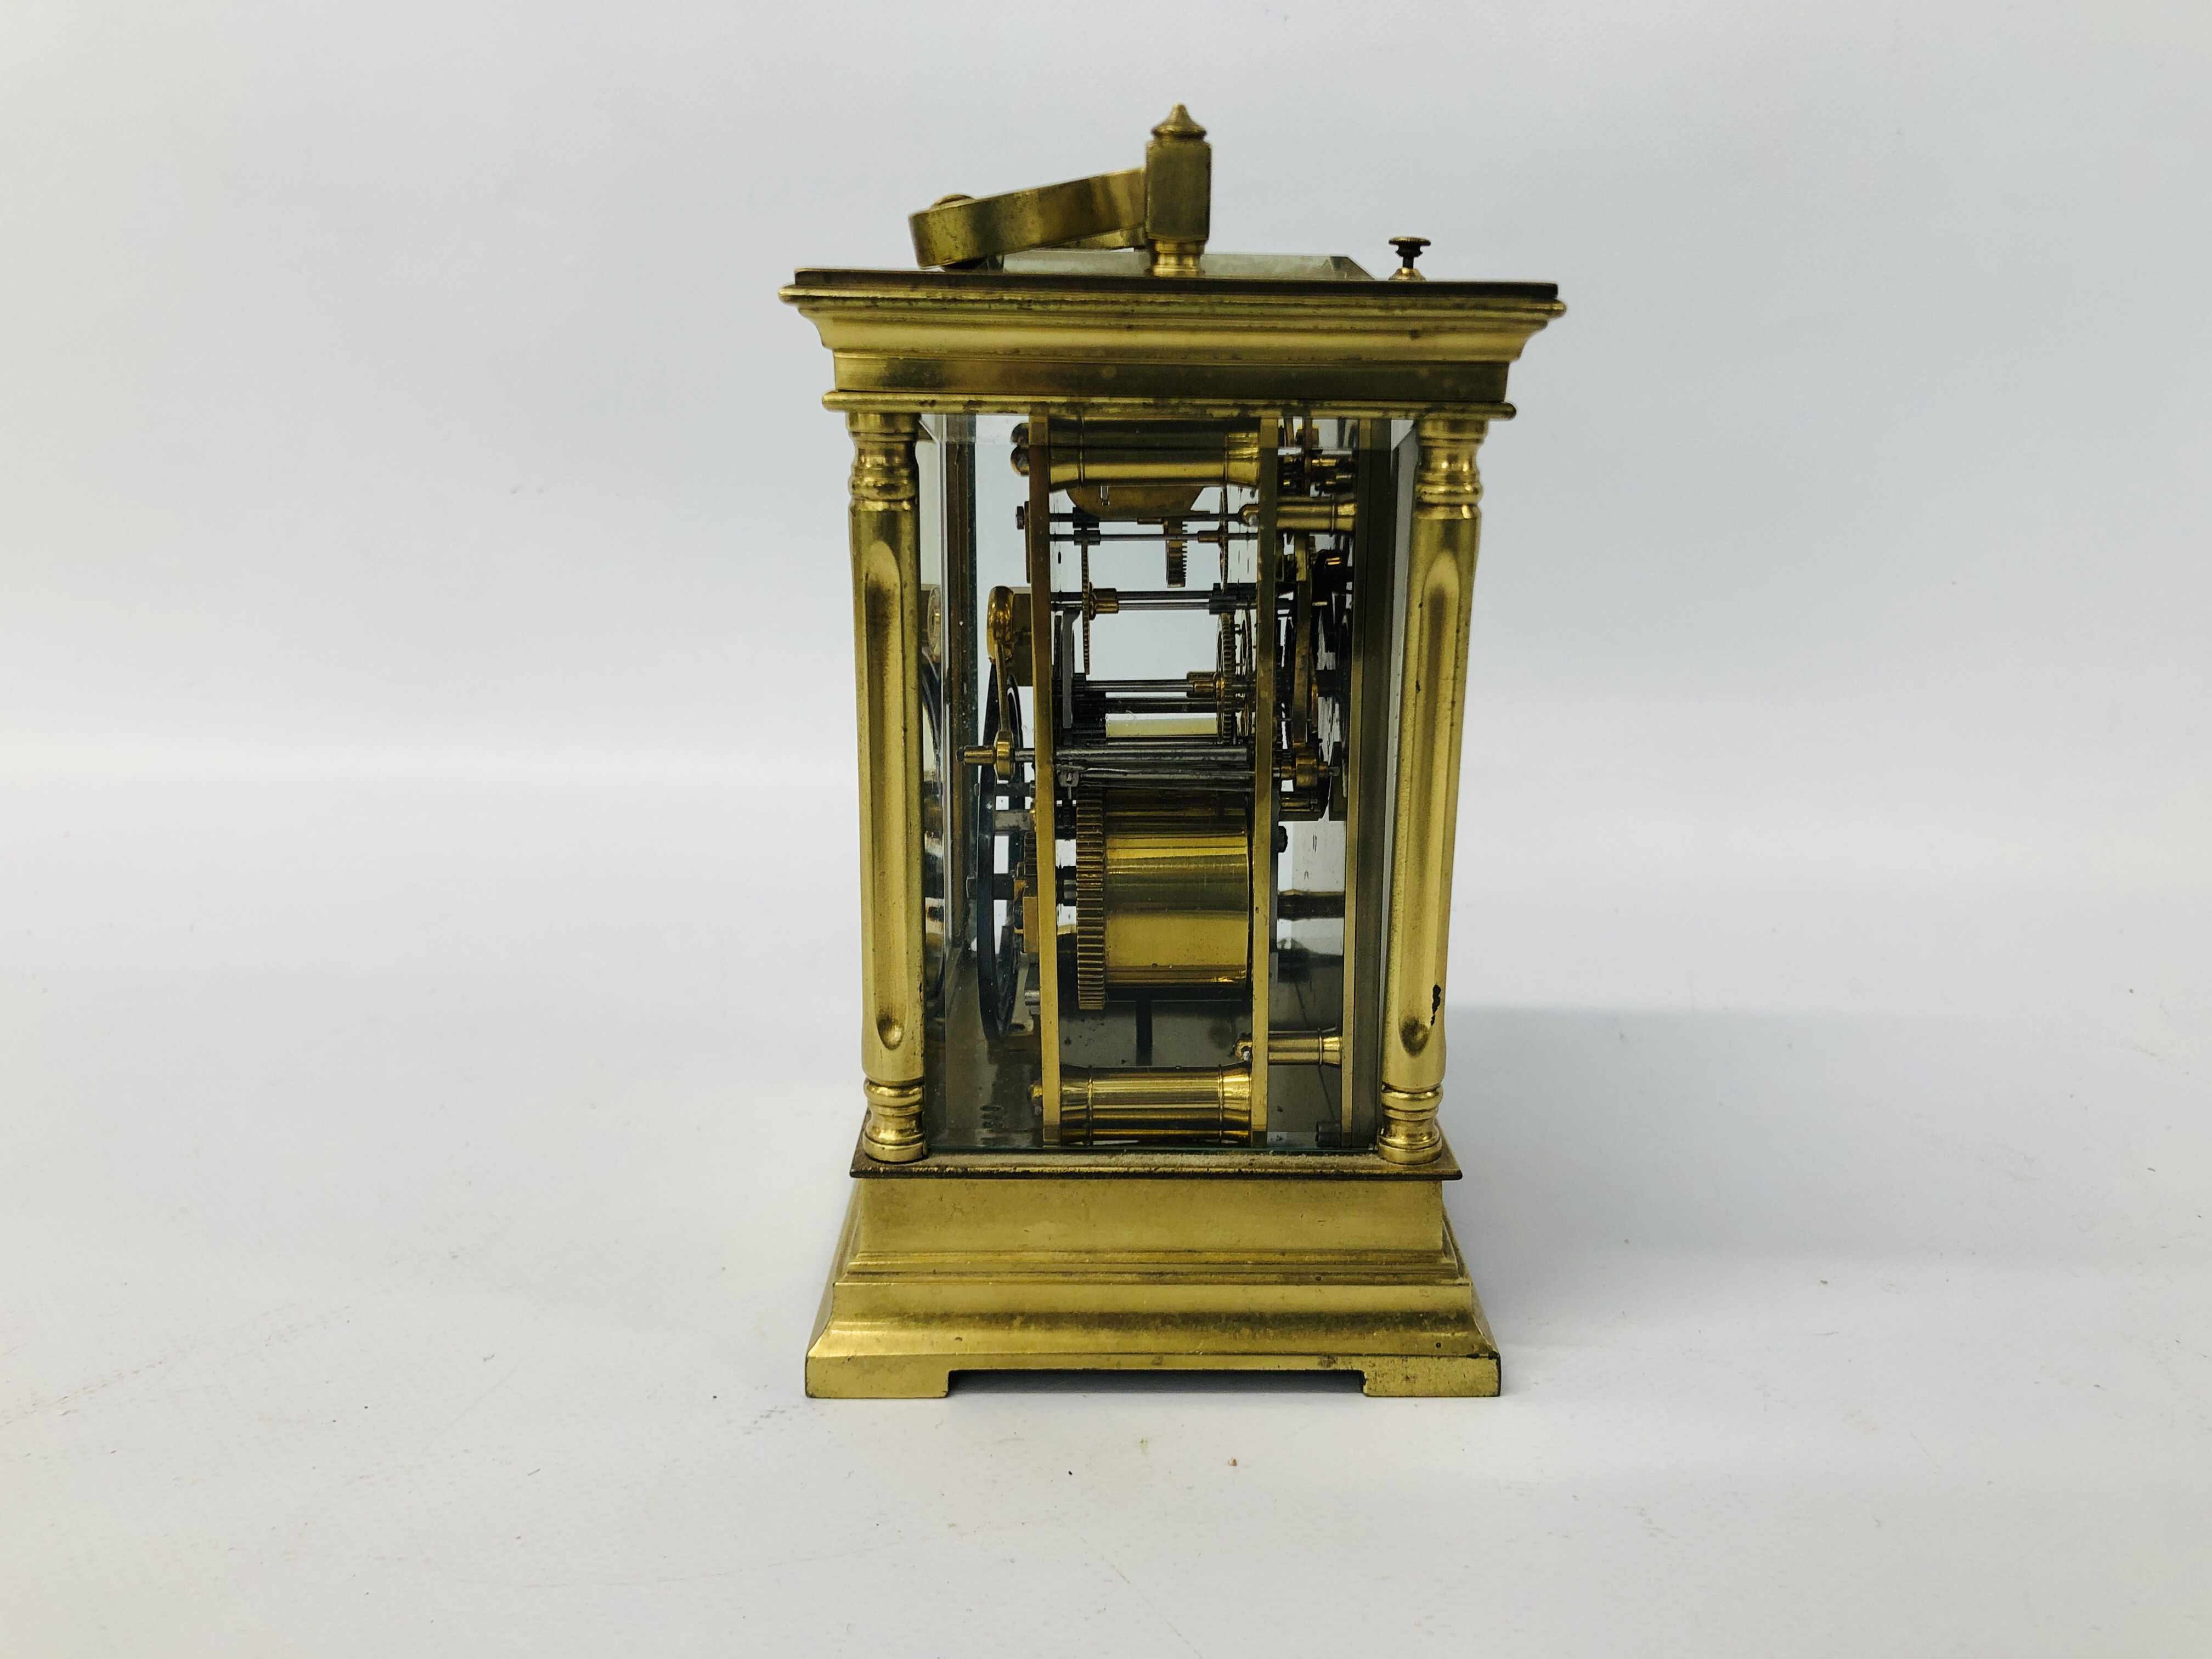 ANTIQUE BRASS CARRIDGE CLOCK WITH ENAMELLED FACE (REQUIRES ATTENTION TO THE REAR GLASS) H 14CM. - Image 9 of 9